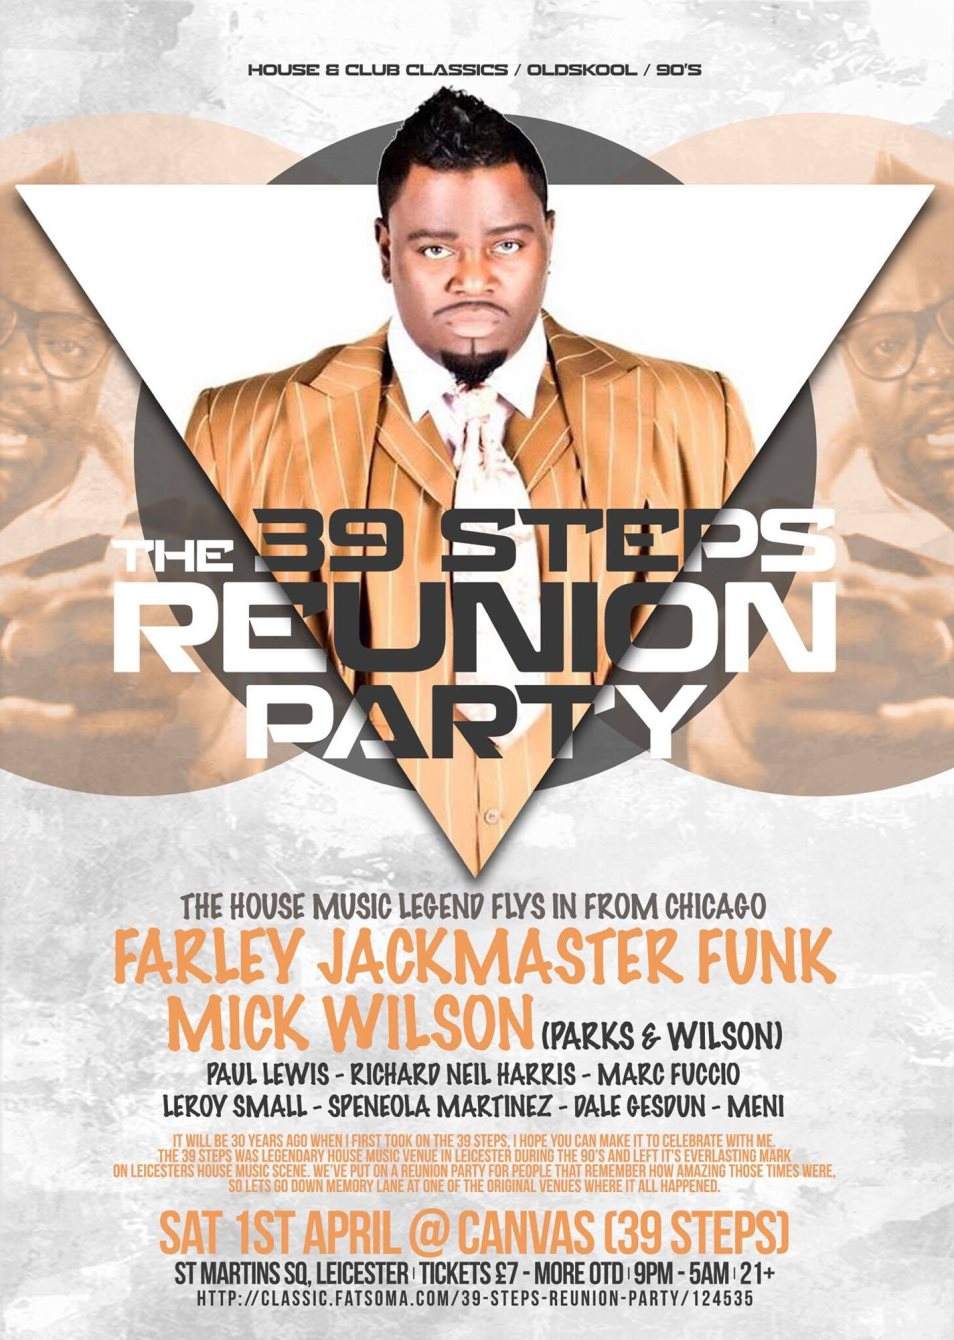 The 39 Steps Reunion Party with Farley Jackmaster Funk - Página frontal